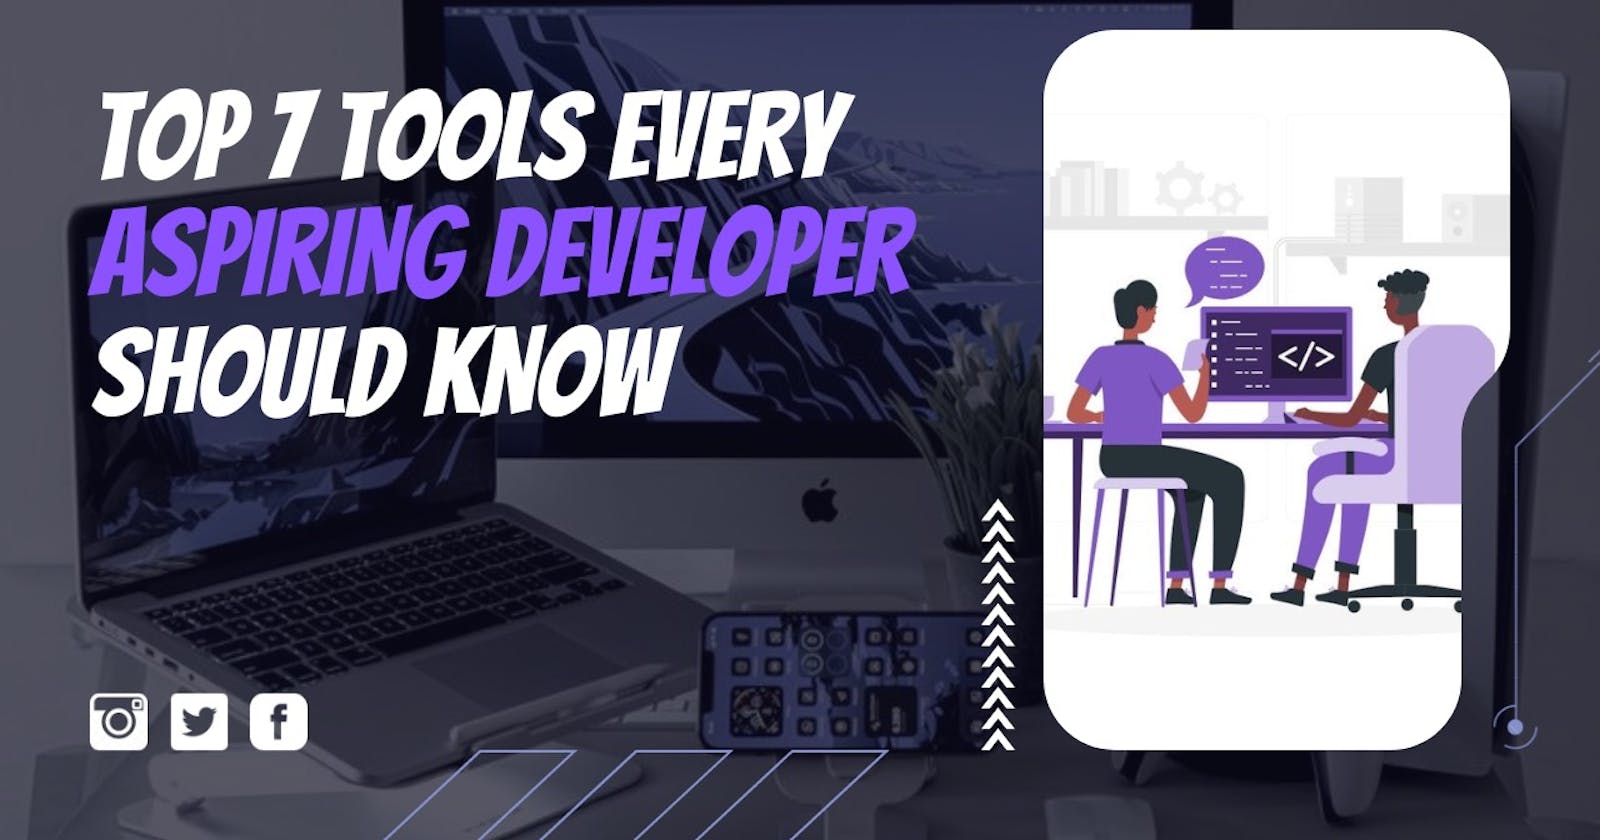 Top 7 Tools Every Aspiring Developer Should Know